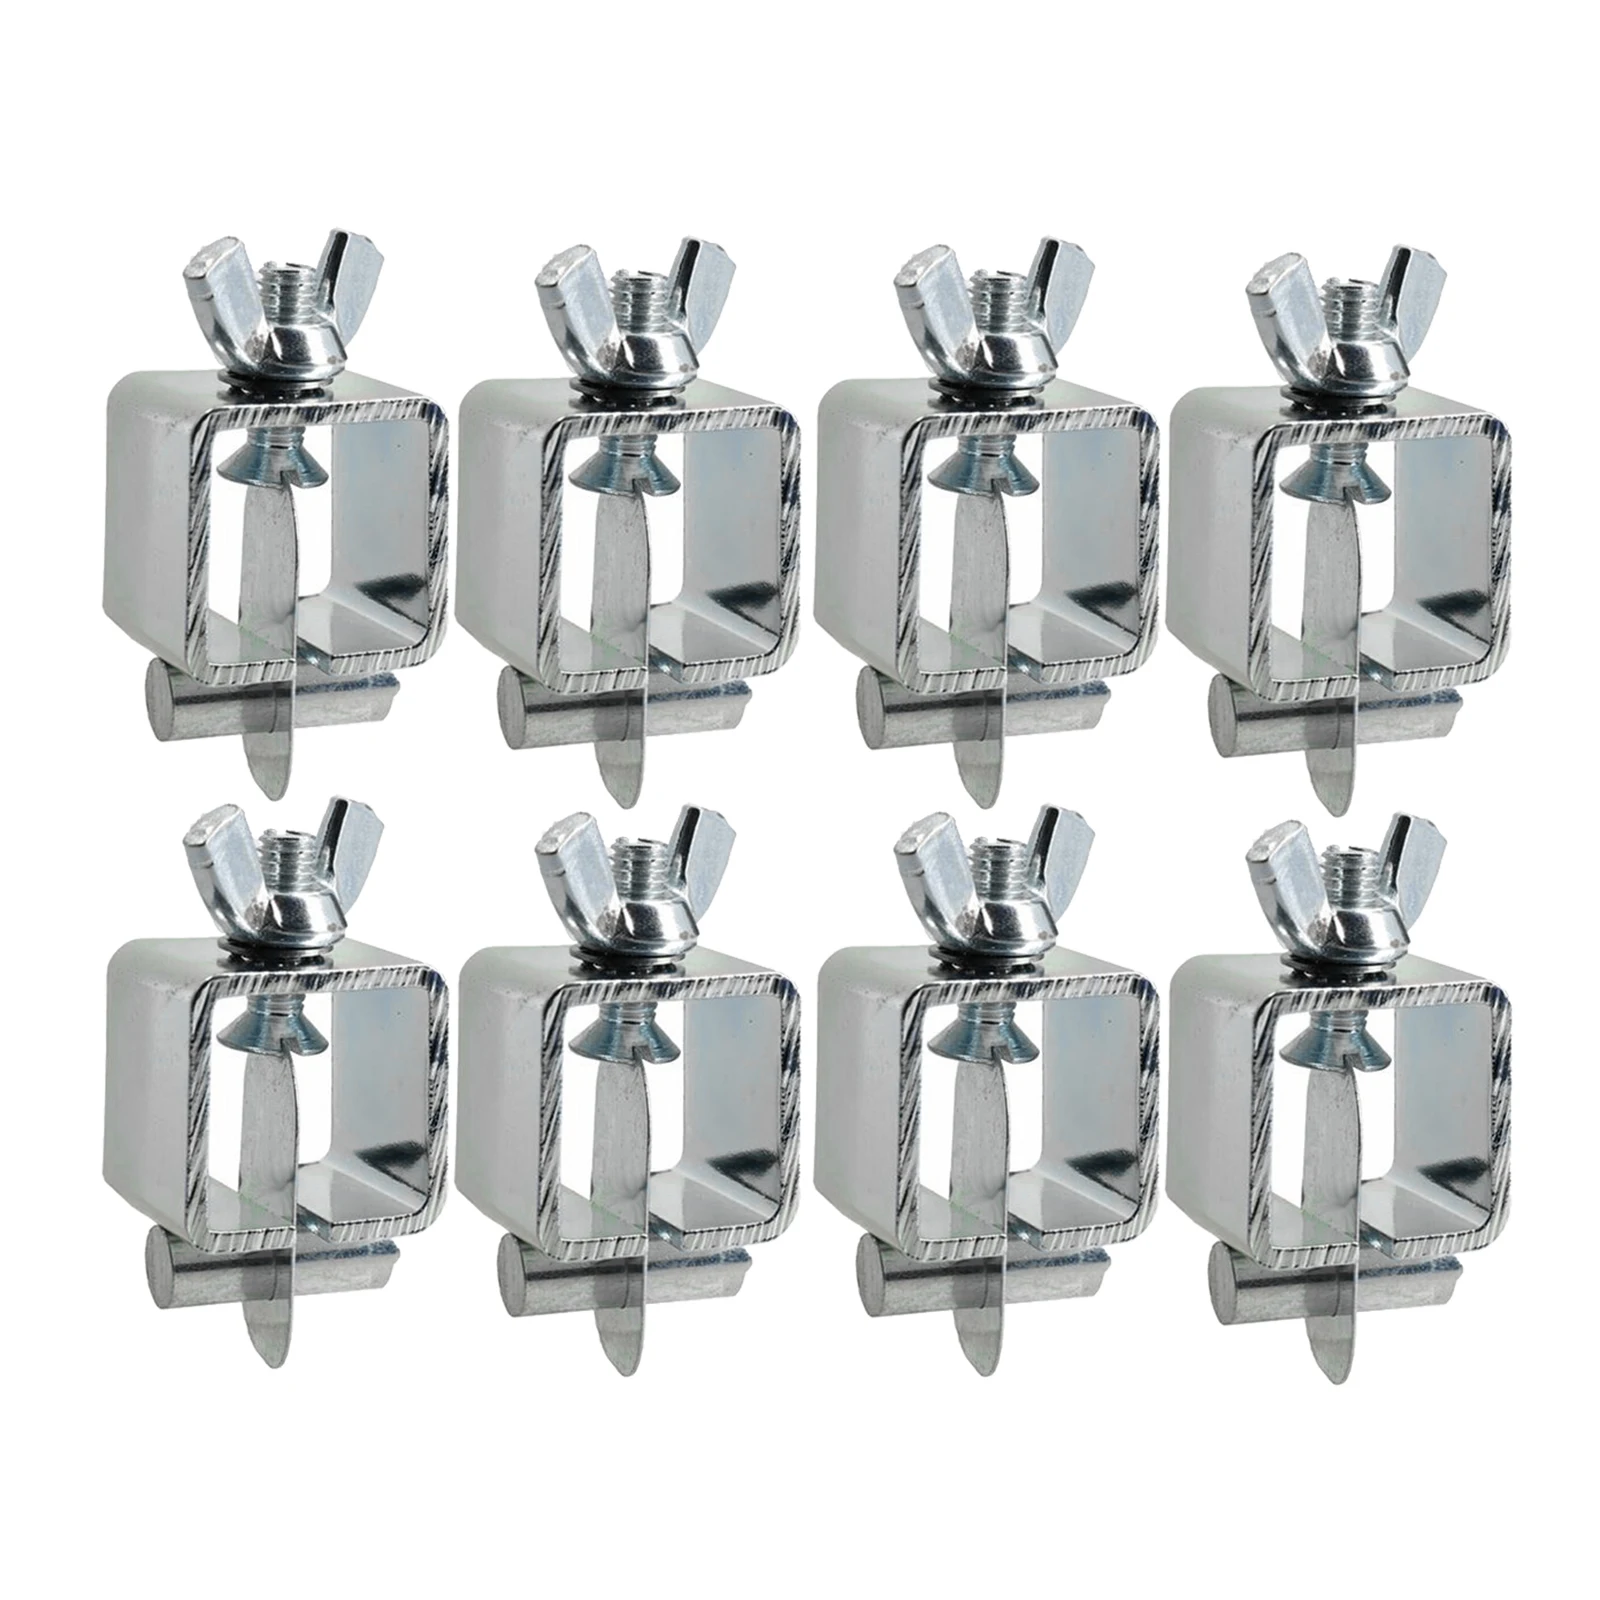 8pcs Welding Butterfly Clamps Holder Butt Weld Clamps Welding Positioner Fixture for Welding Clamps Tools Set